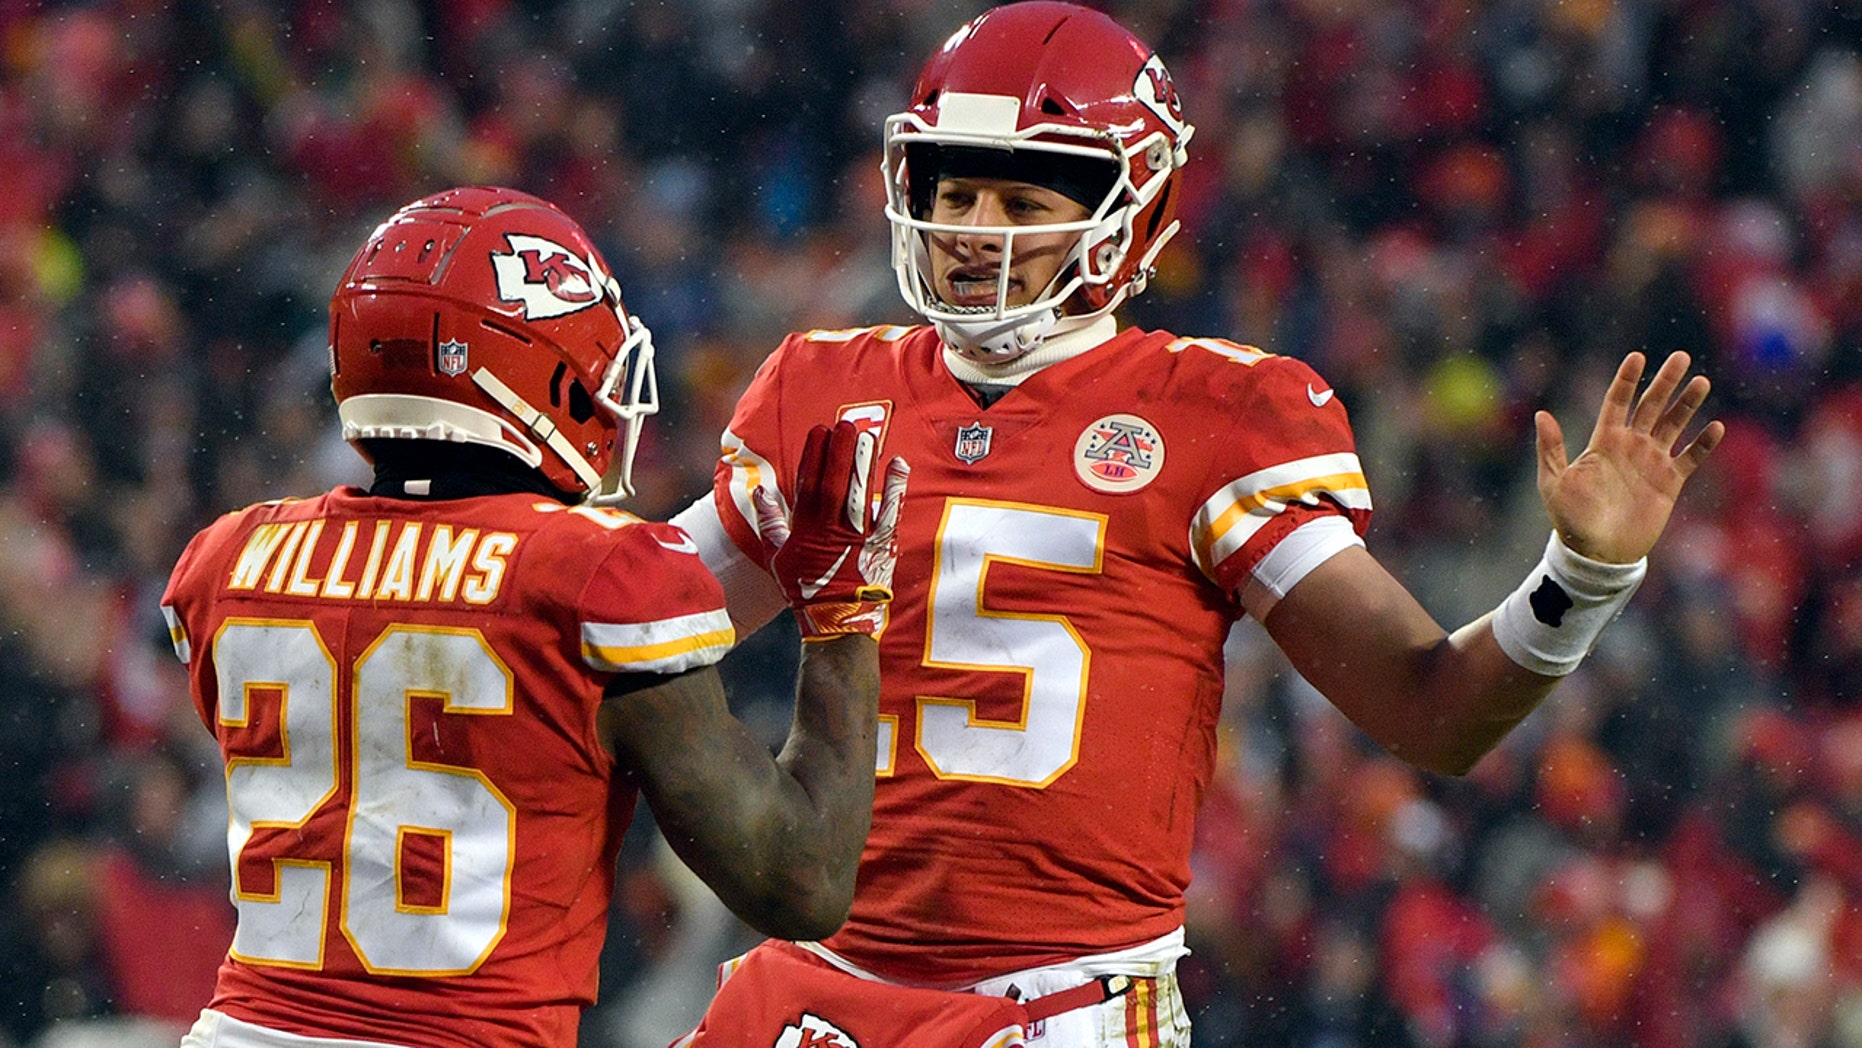 Chiefs roll past Colts 31-13 to reach AFC title game | Fox News